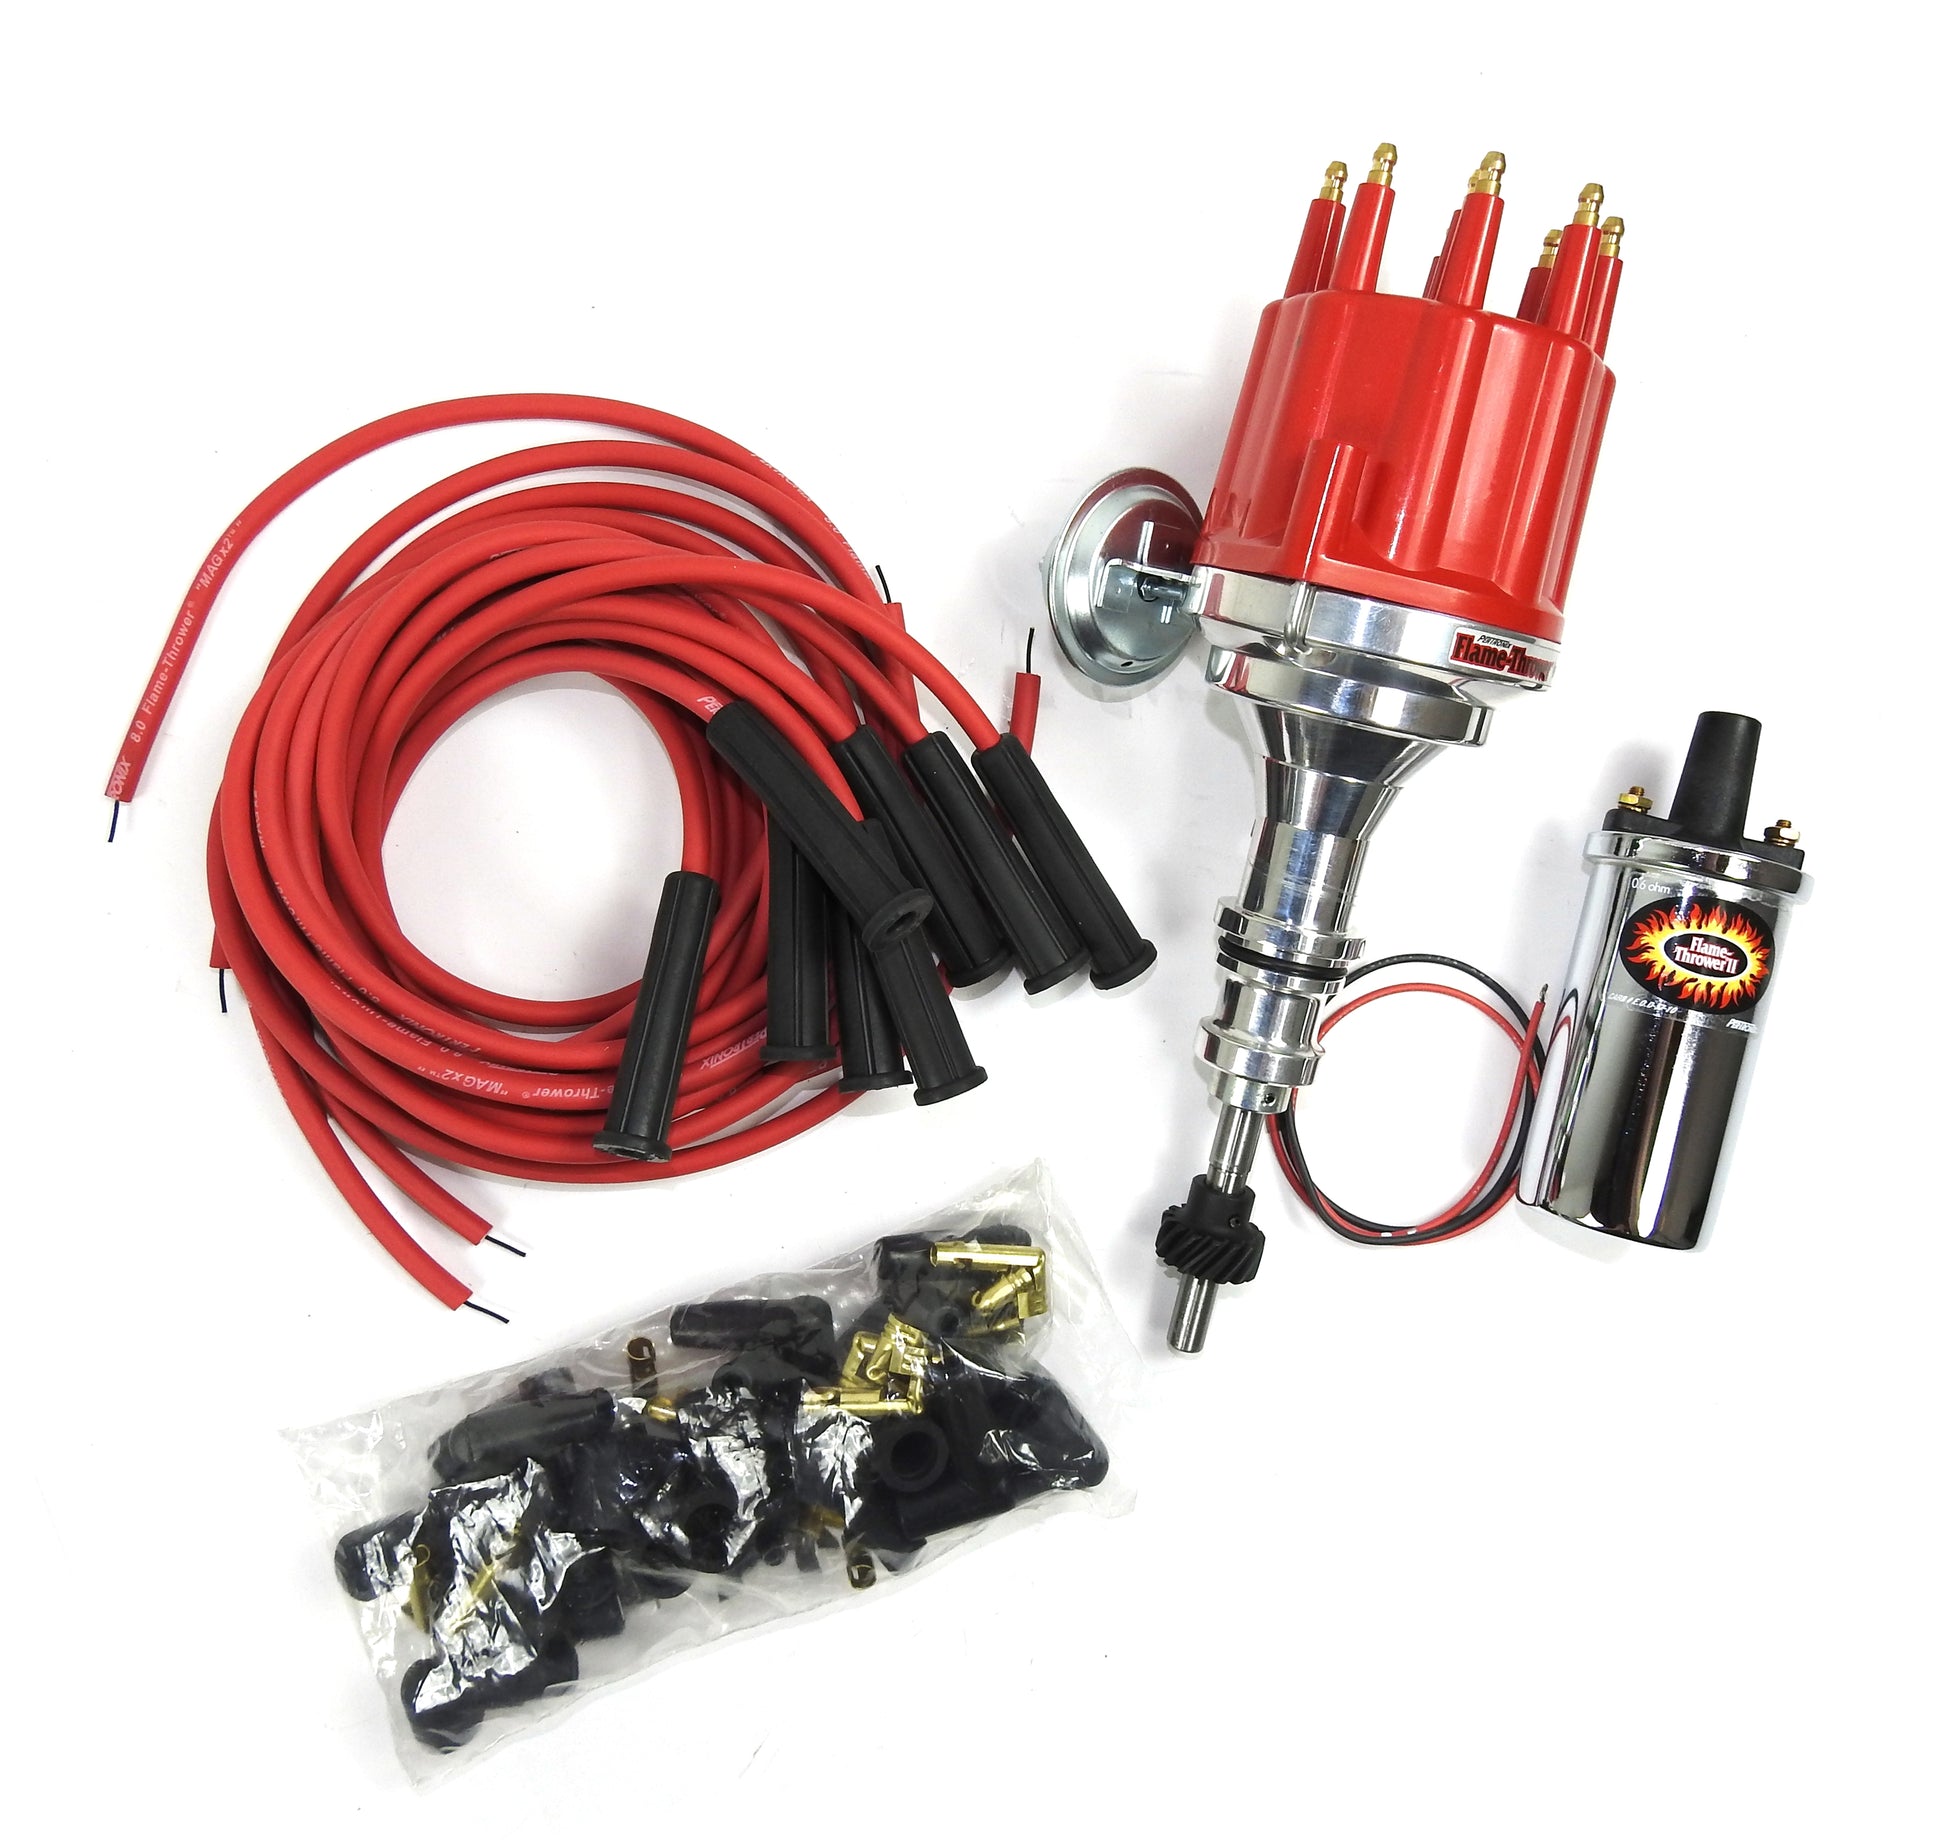 Pertronix Bundle007 Ignition Kit includes Ford SB Billet Plug n Play Distributor with Red Male Cap, Flame-Thrower II Chrome Coil, Flame-Thrower MAGx2 Universal Red Spark Plug Wires with 180 degree plug boot ends